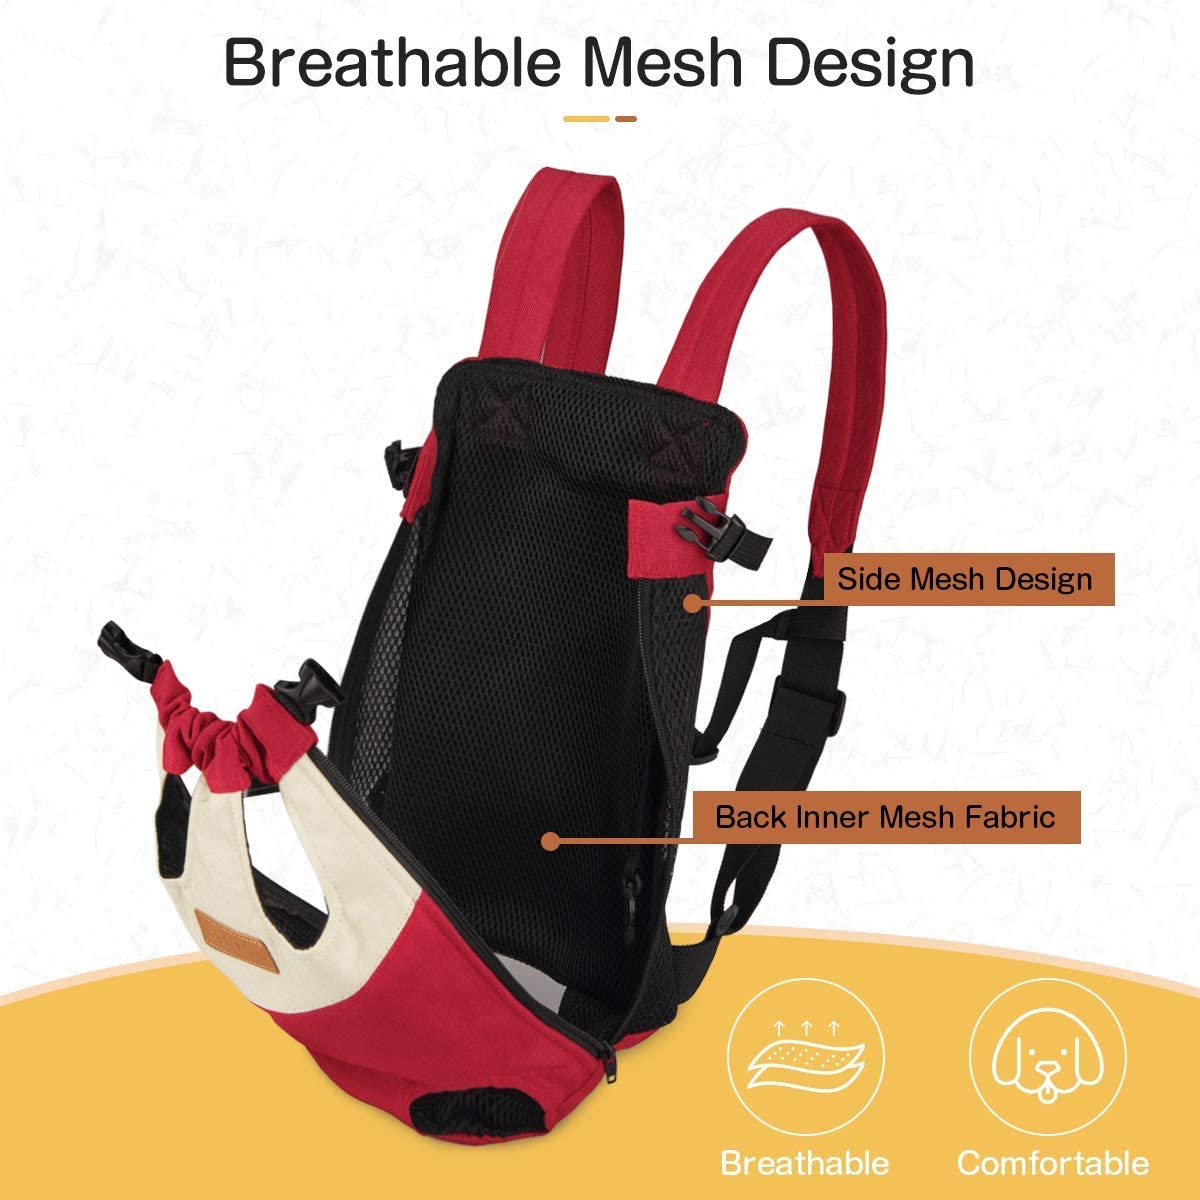 Mesh Pet Dog Carrier Adjustable Backpack Breathable Outdoor Travel Products Bags For Small Dog Cat Chihuahua Pet Backpack